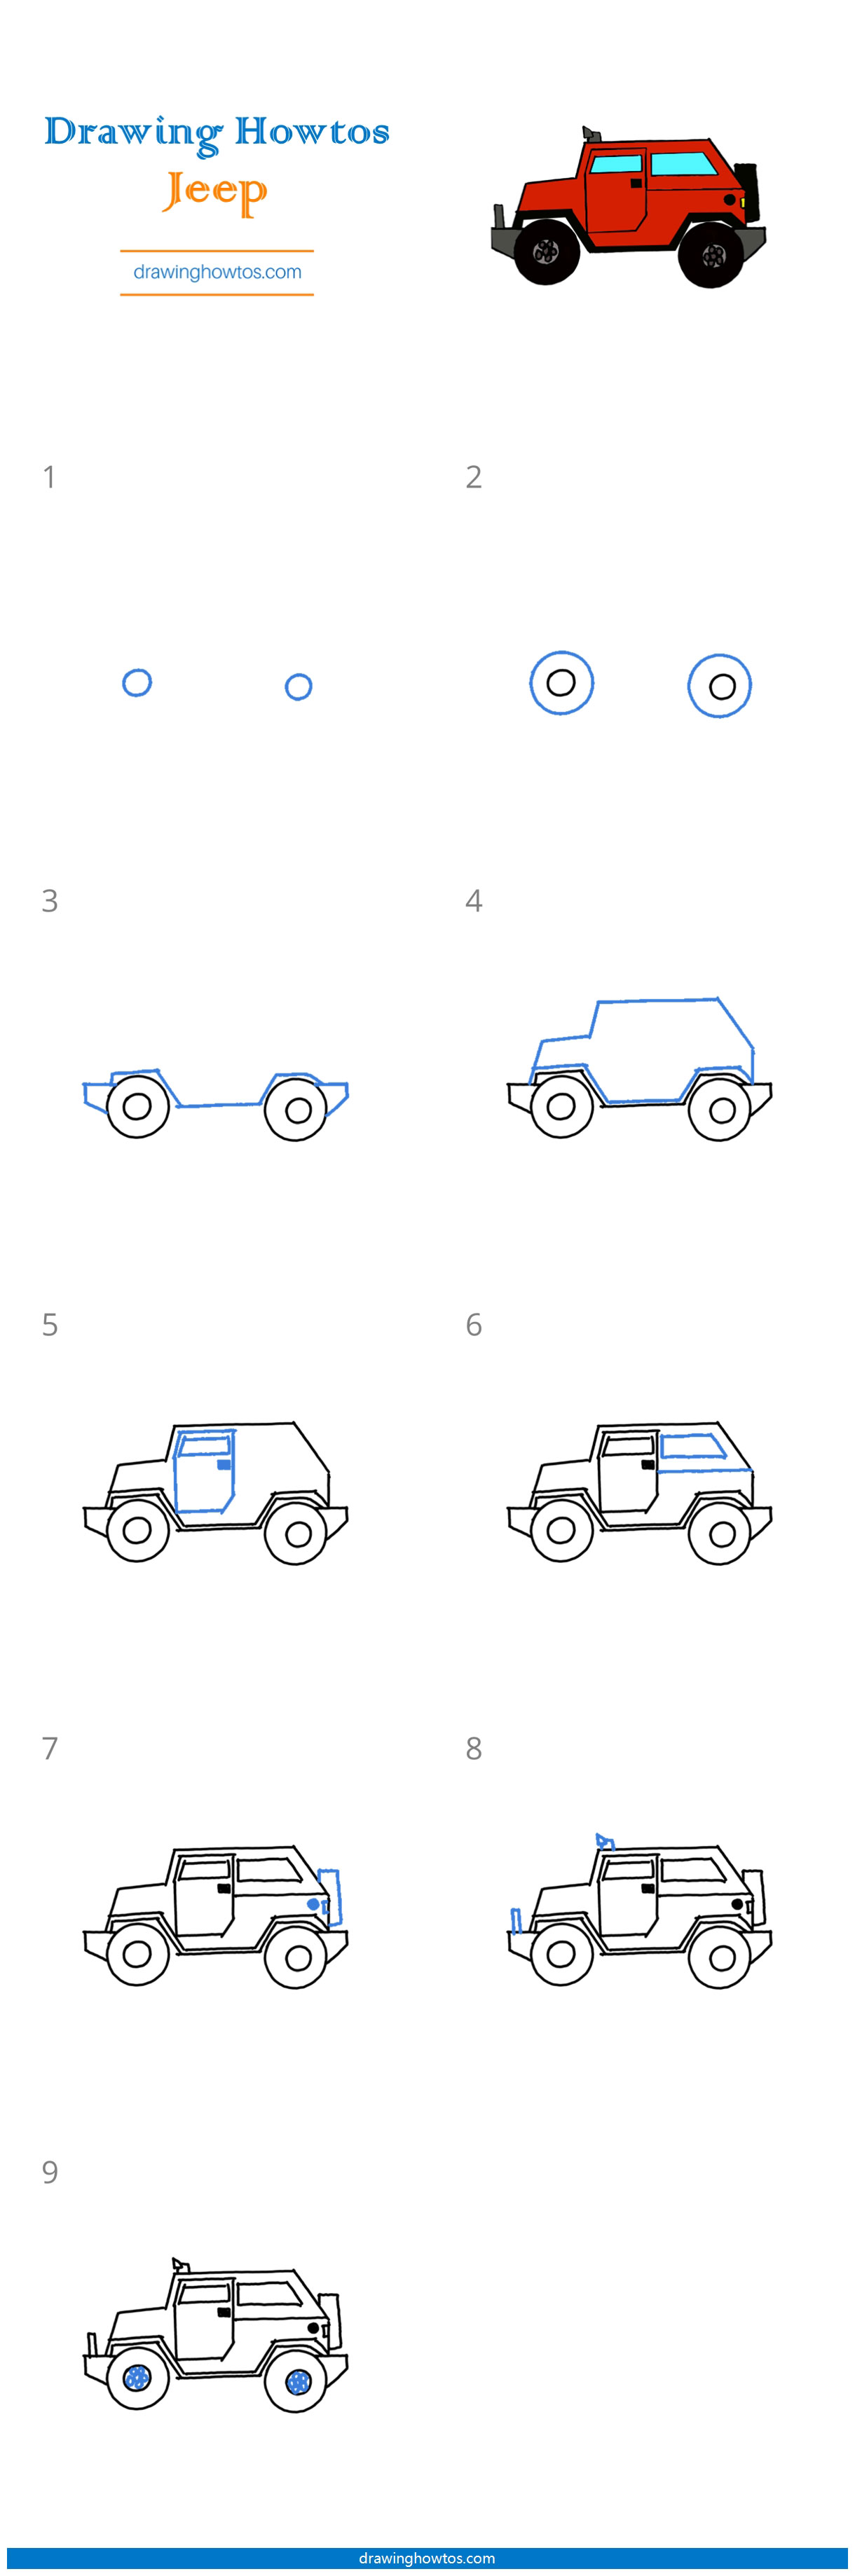 How to Draw a Jeep Step by Step